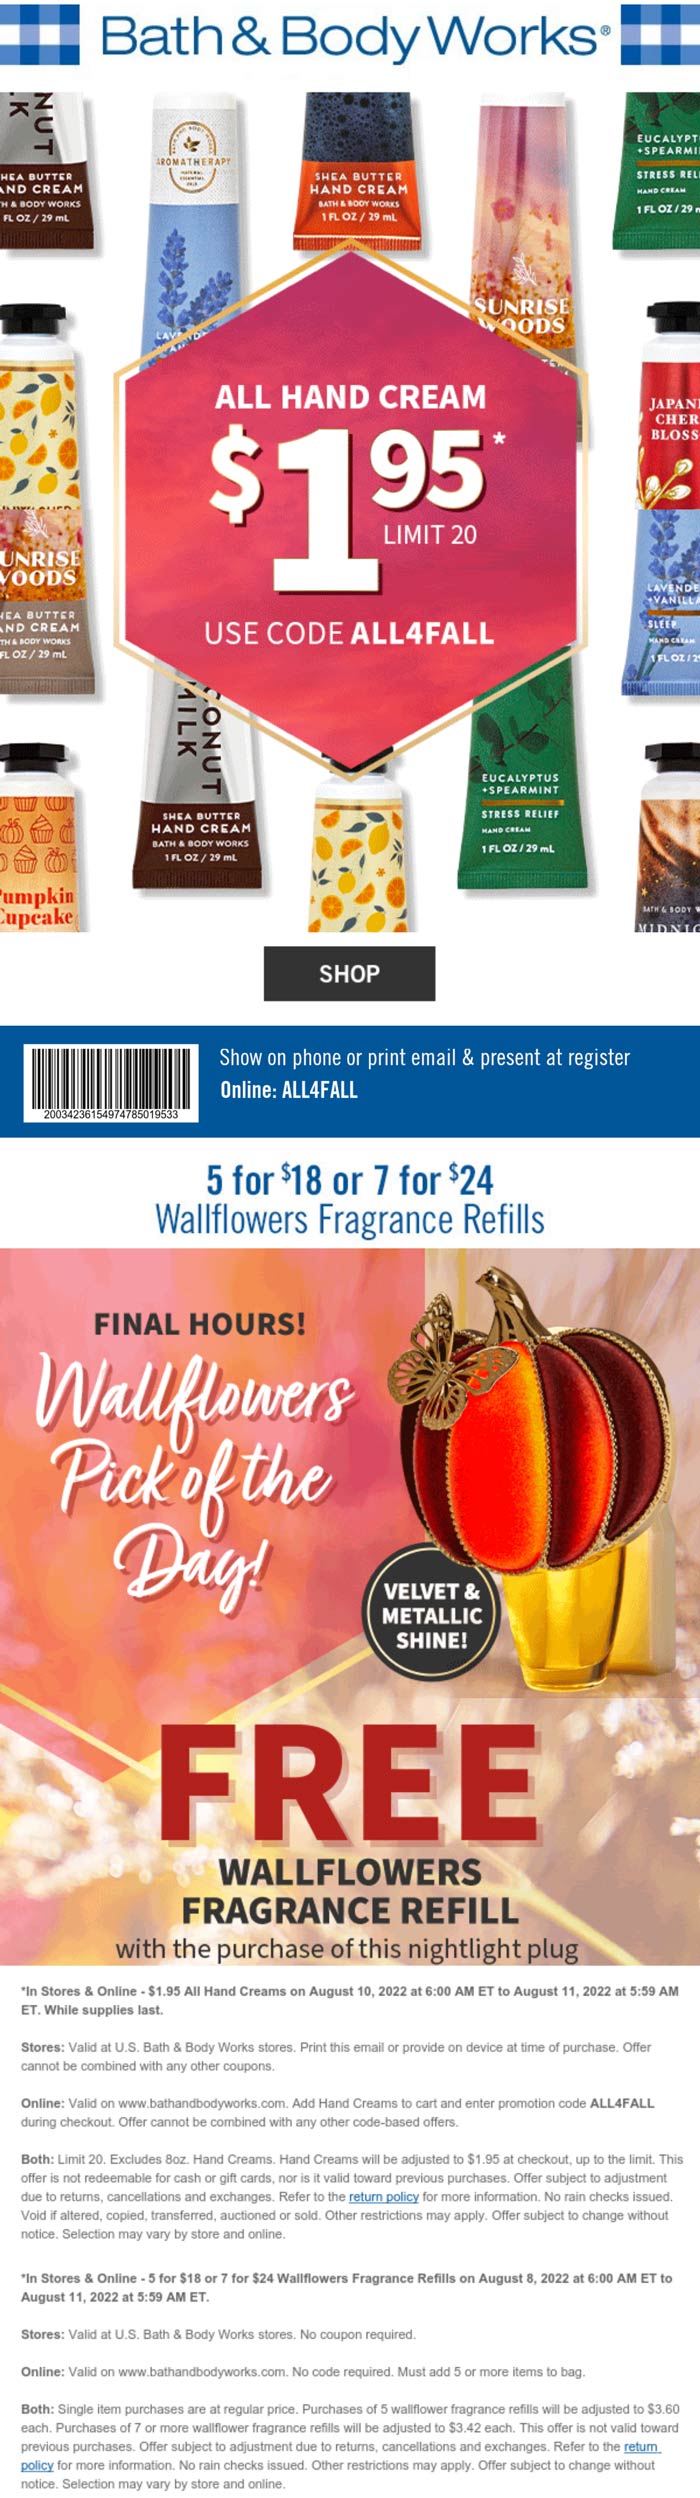 Bath & Body Works restaurants Coupon  $2 hand cream & more today at Bath & Body Works, or online via promo code ALL4FALL #bathbodyworks 